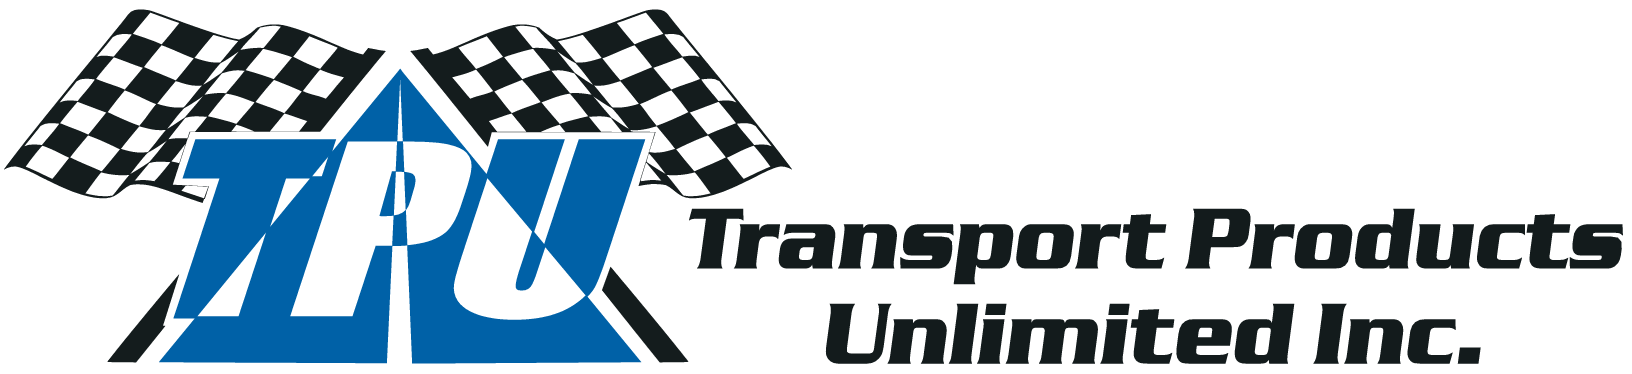 Transport Products Unlimited Inc.